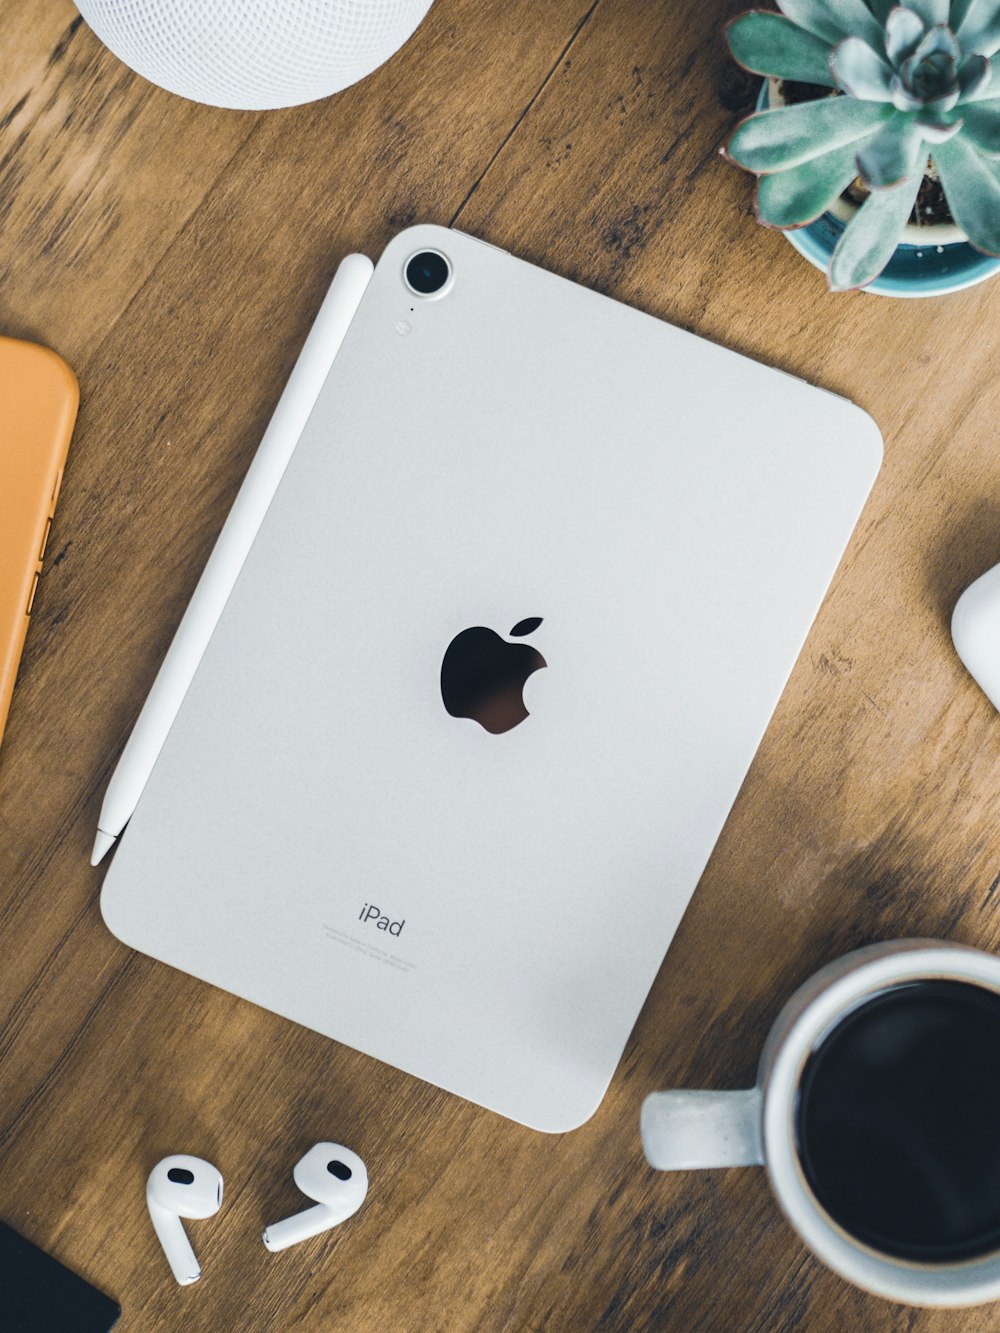 an apple ipad sitting on top of a wooden table next to a cup of coffee